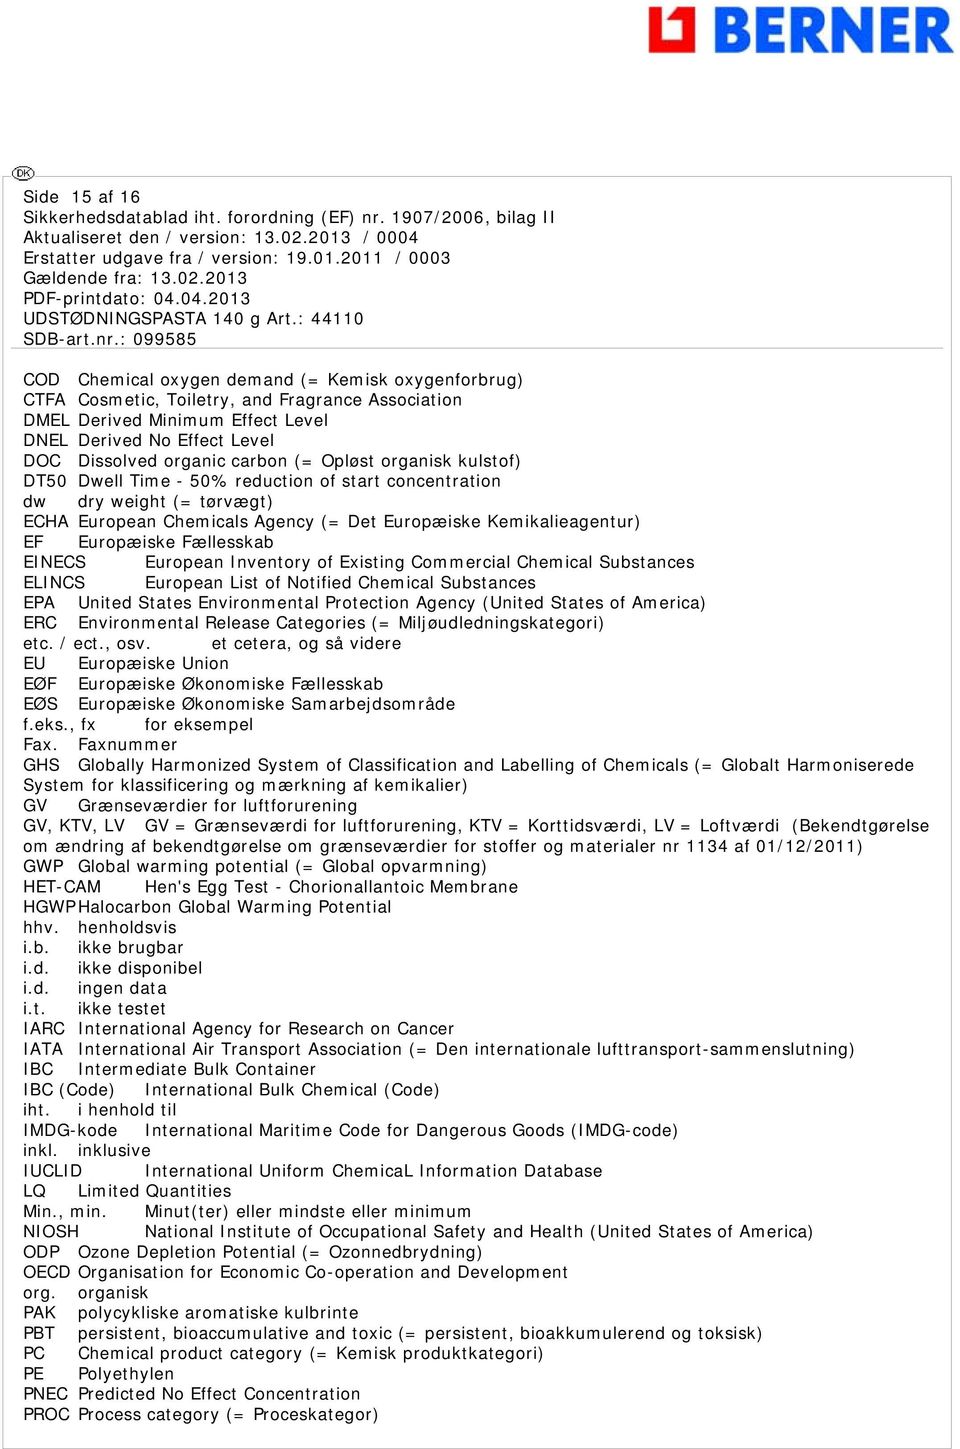 Europæiske Fællesskab EINECS European Inventory of Existing Commercial Chemical Substances ELINCS European List of Notified Chemical Substances EPA United States Environmental Protection Agency